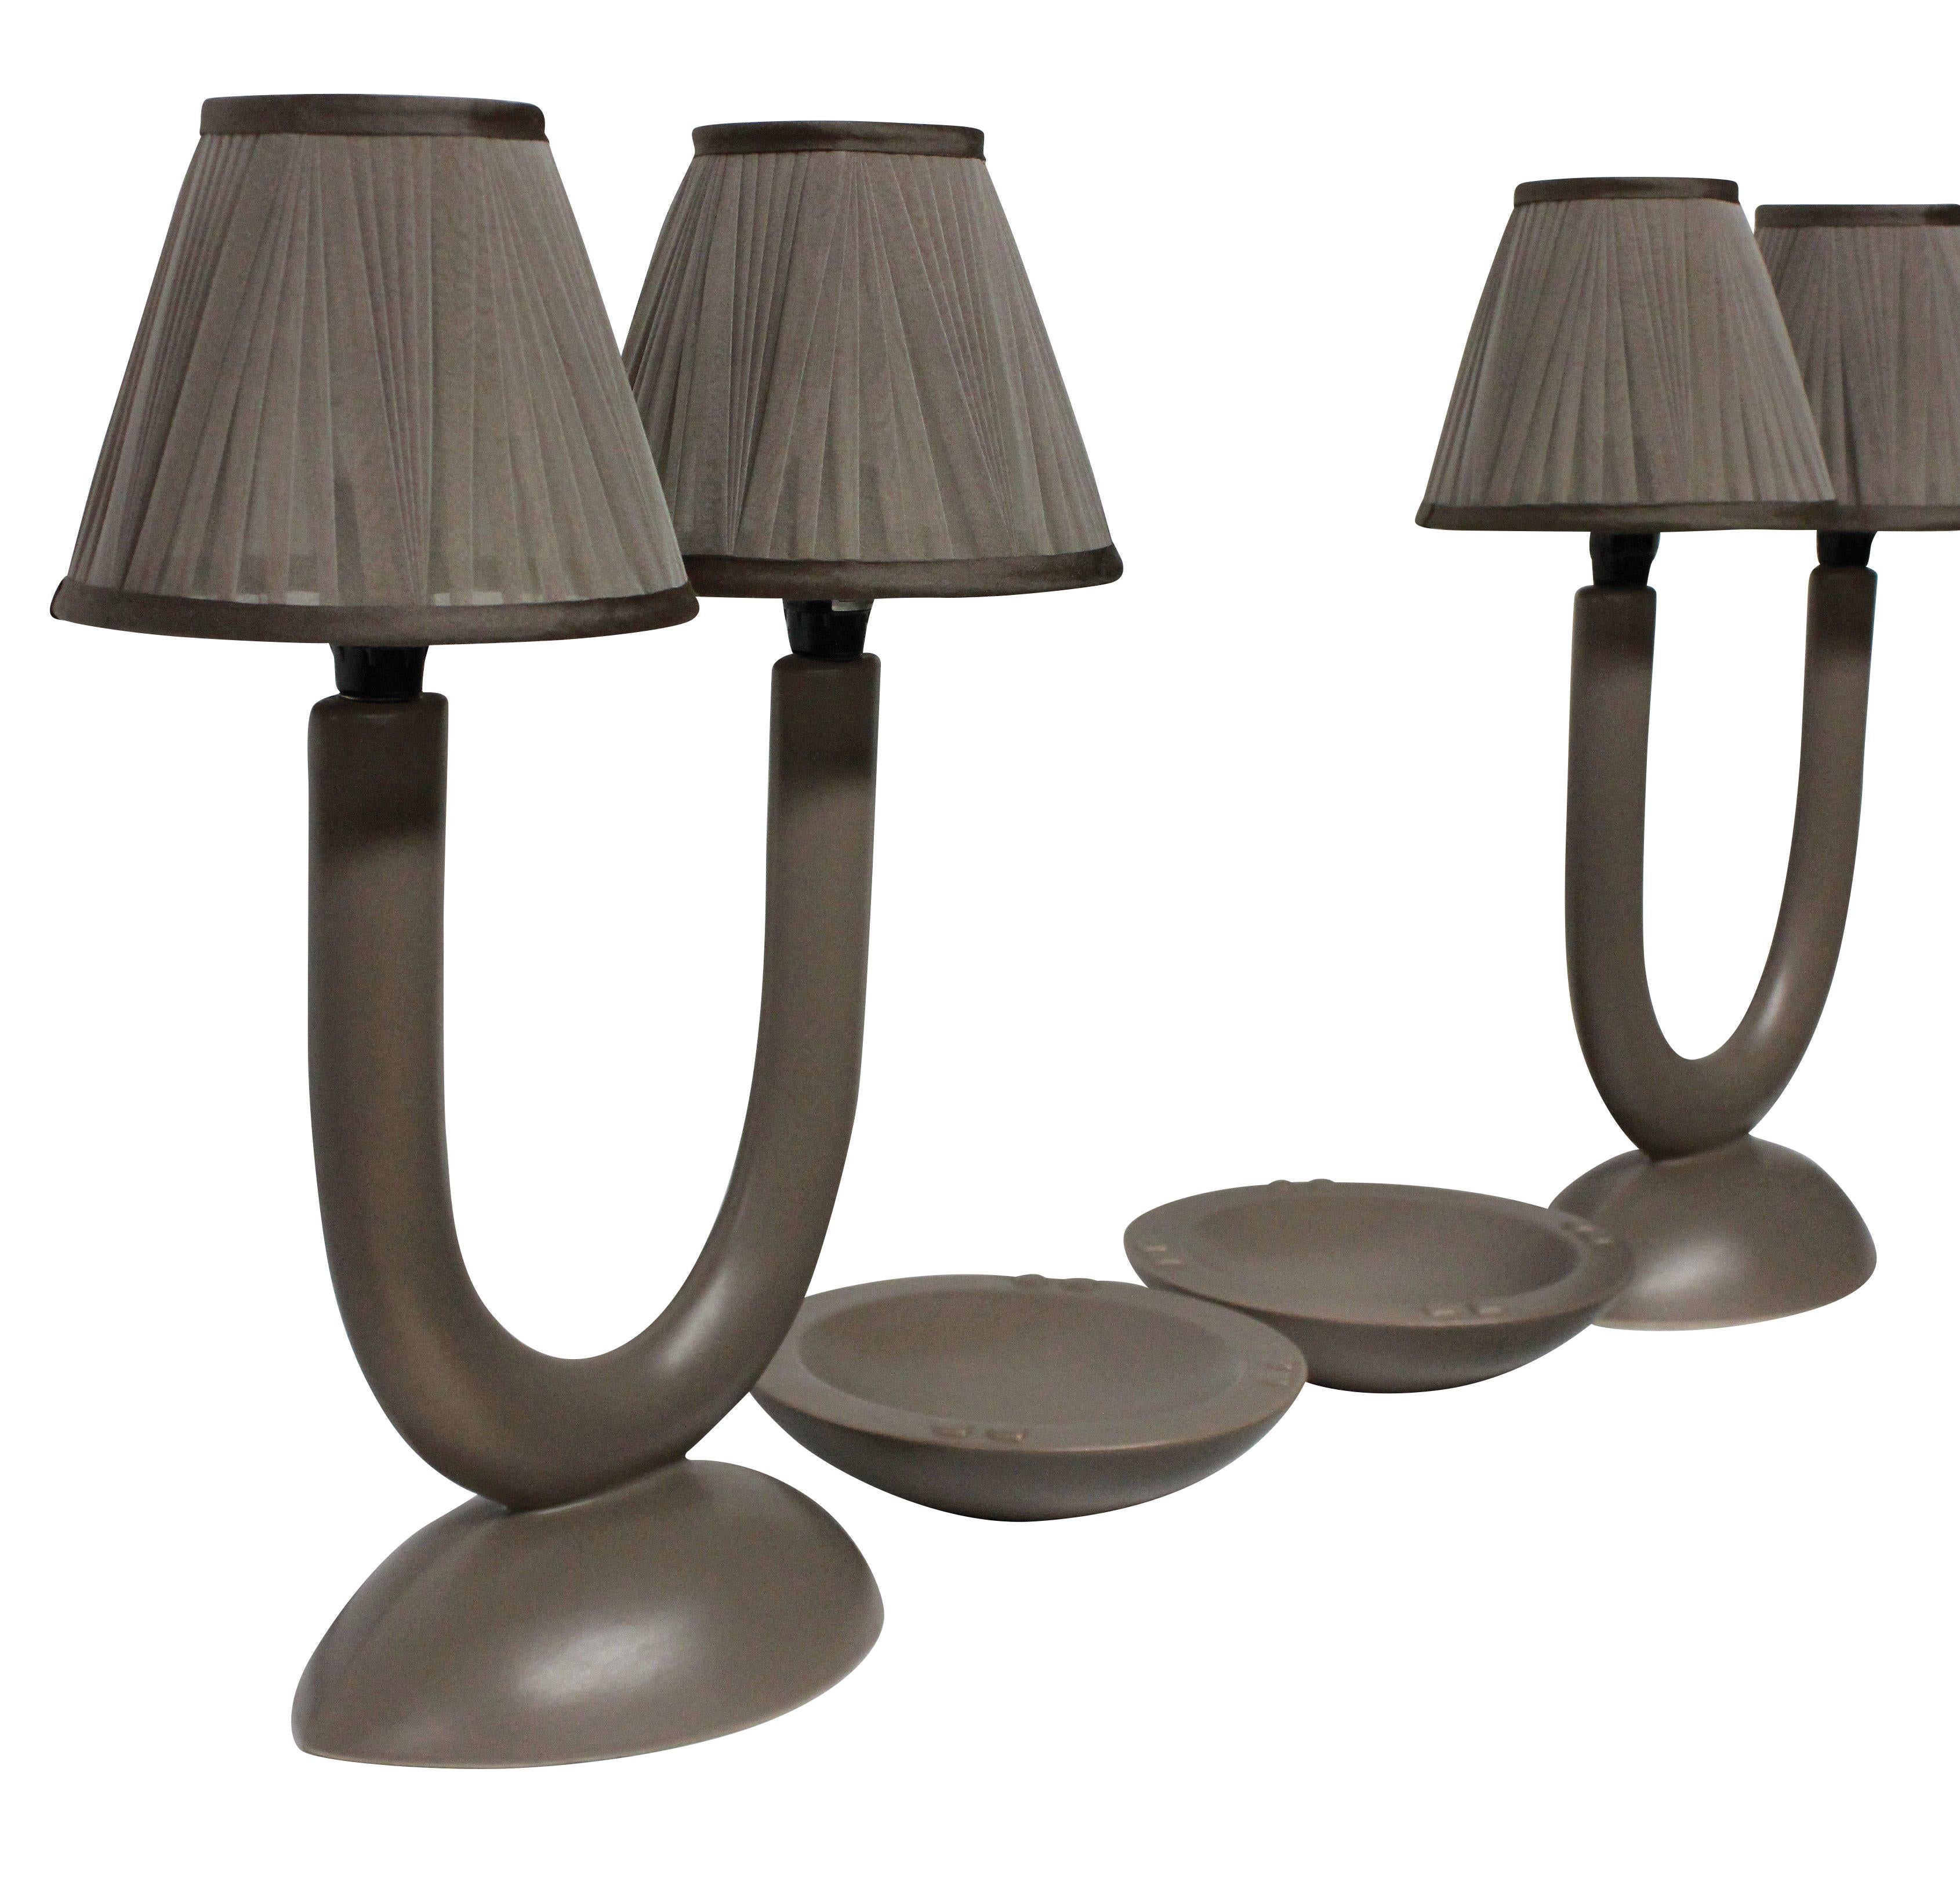 A pair of stylish French bisque porcelain lamps and matching ashtrays in a stone color with new pleated shades.